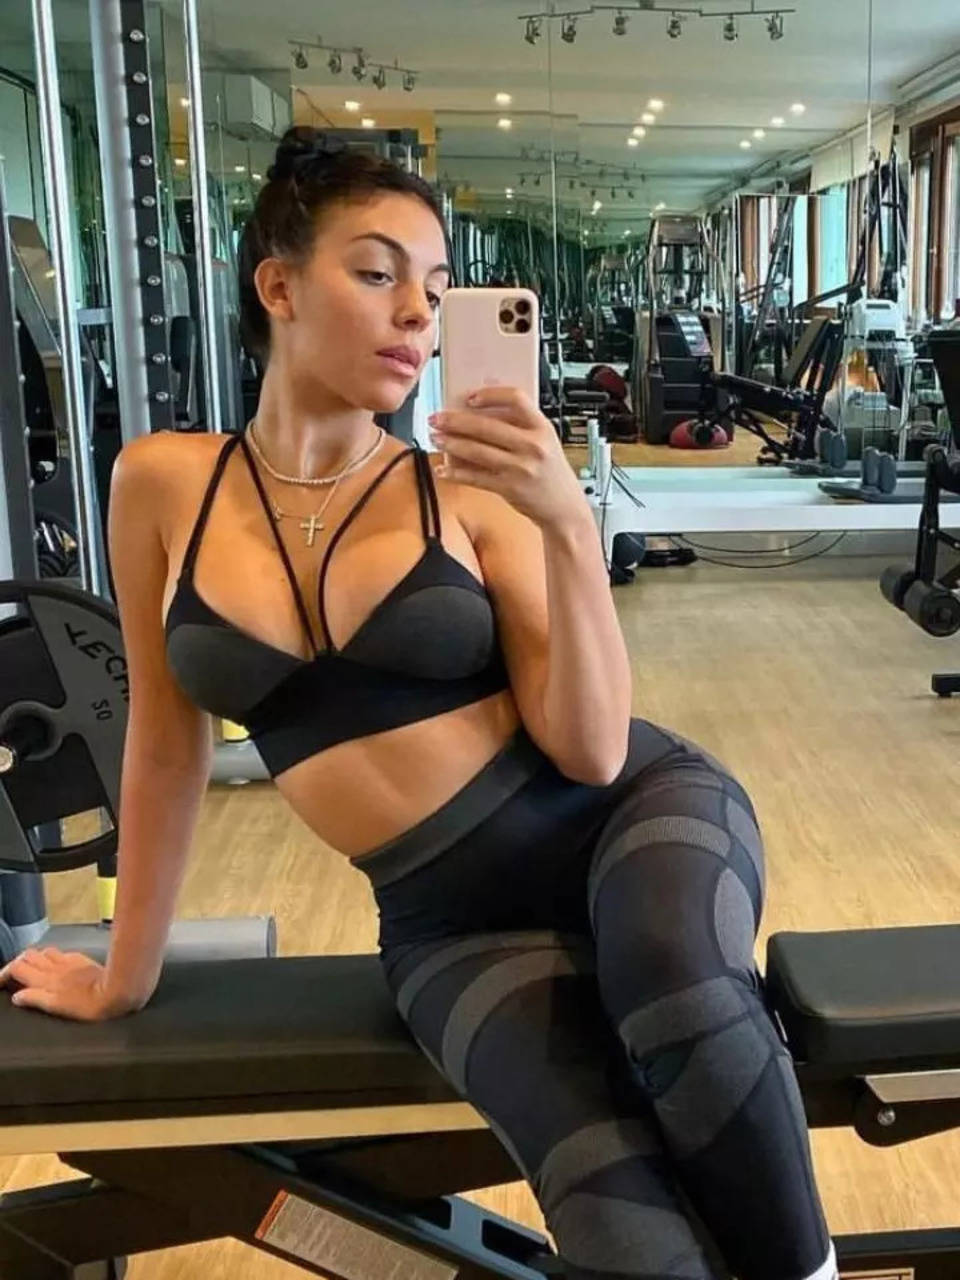 What Christiano Ronaldo's girlfriend Georgina Rodriguez does to stay toned